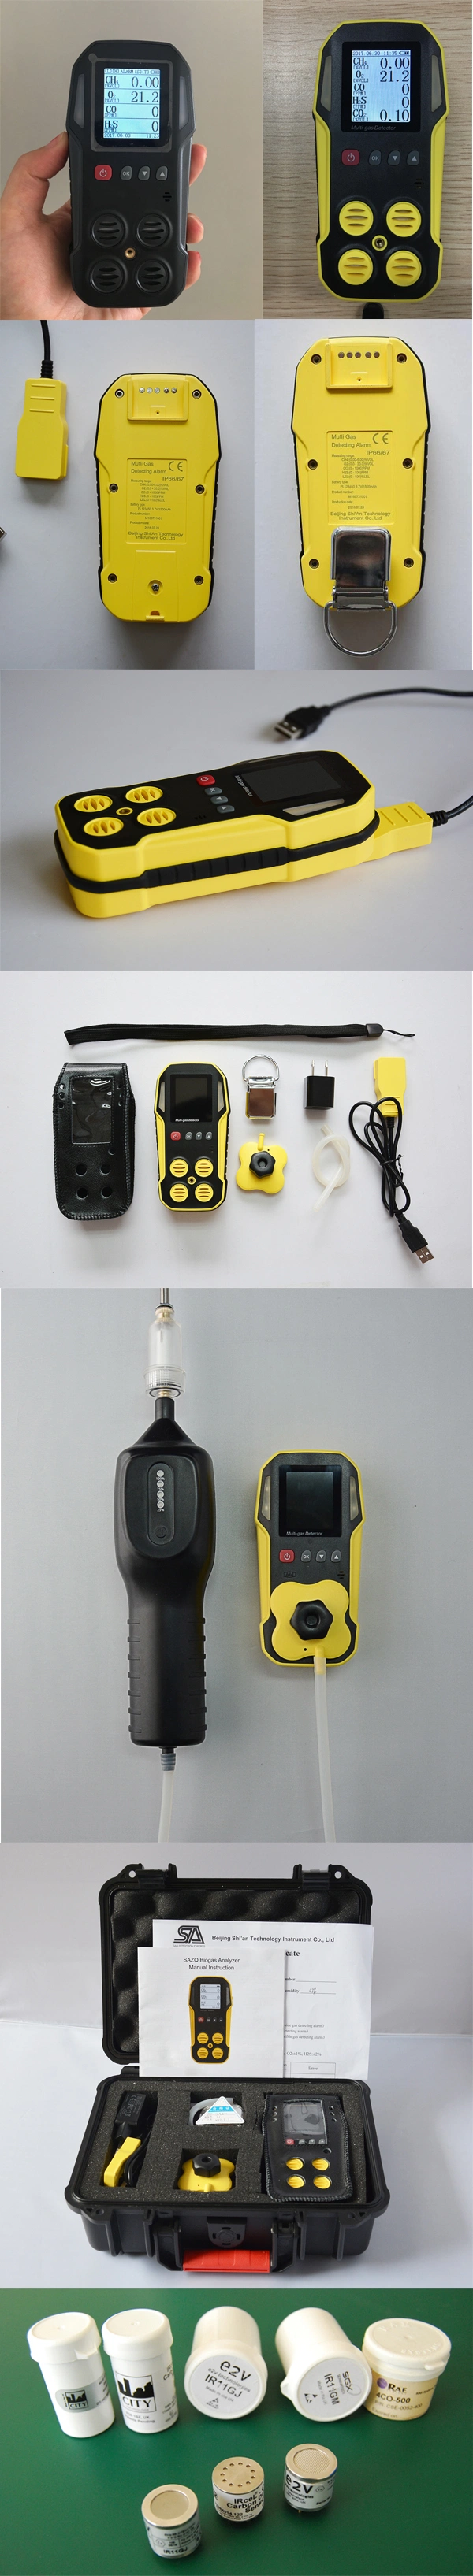 IP66 Multi Gas Detector Handheld 4 Gas Monitor with UK Imported Sensor